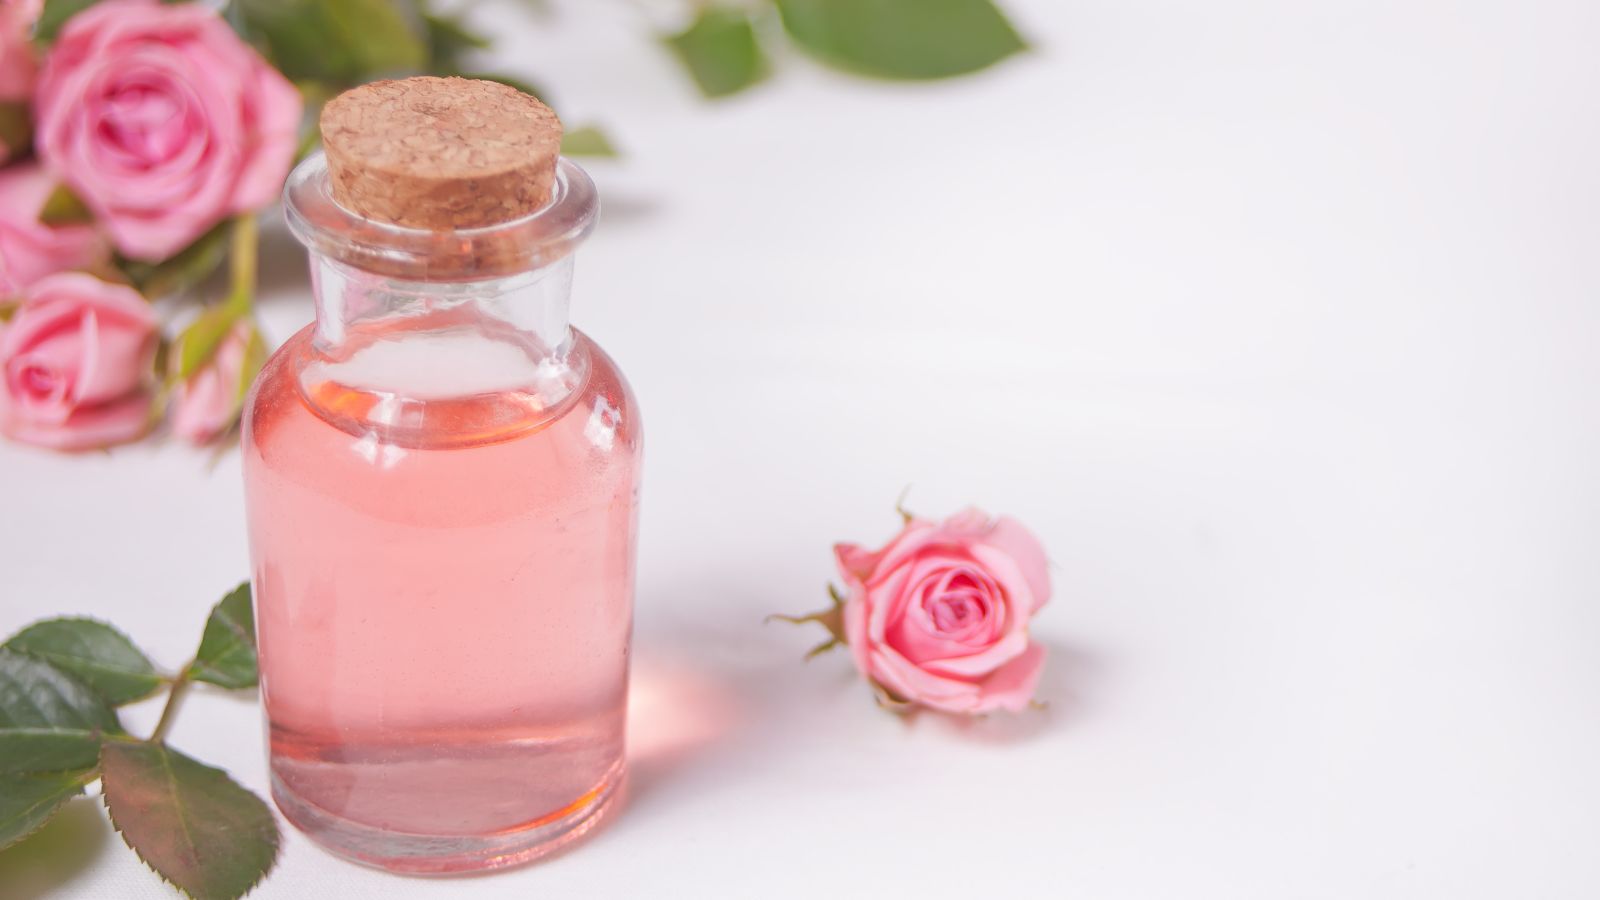 rose essential oil blends well with other oils. Image of roses and some rose essential oil in a bottle